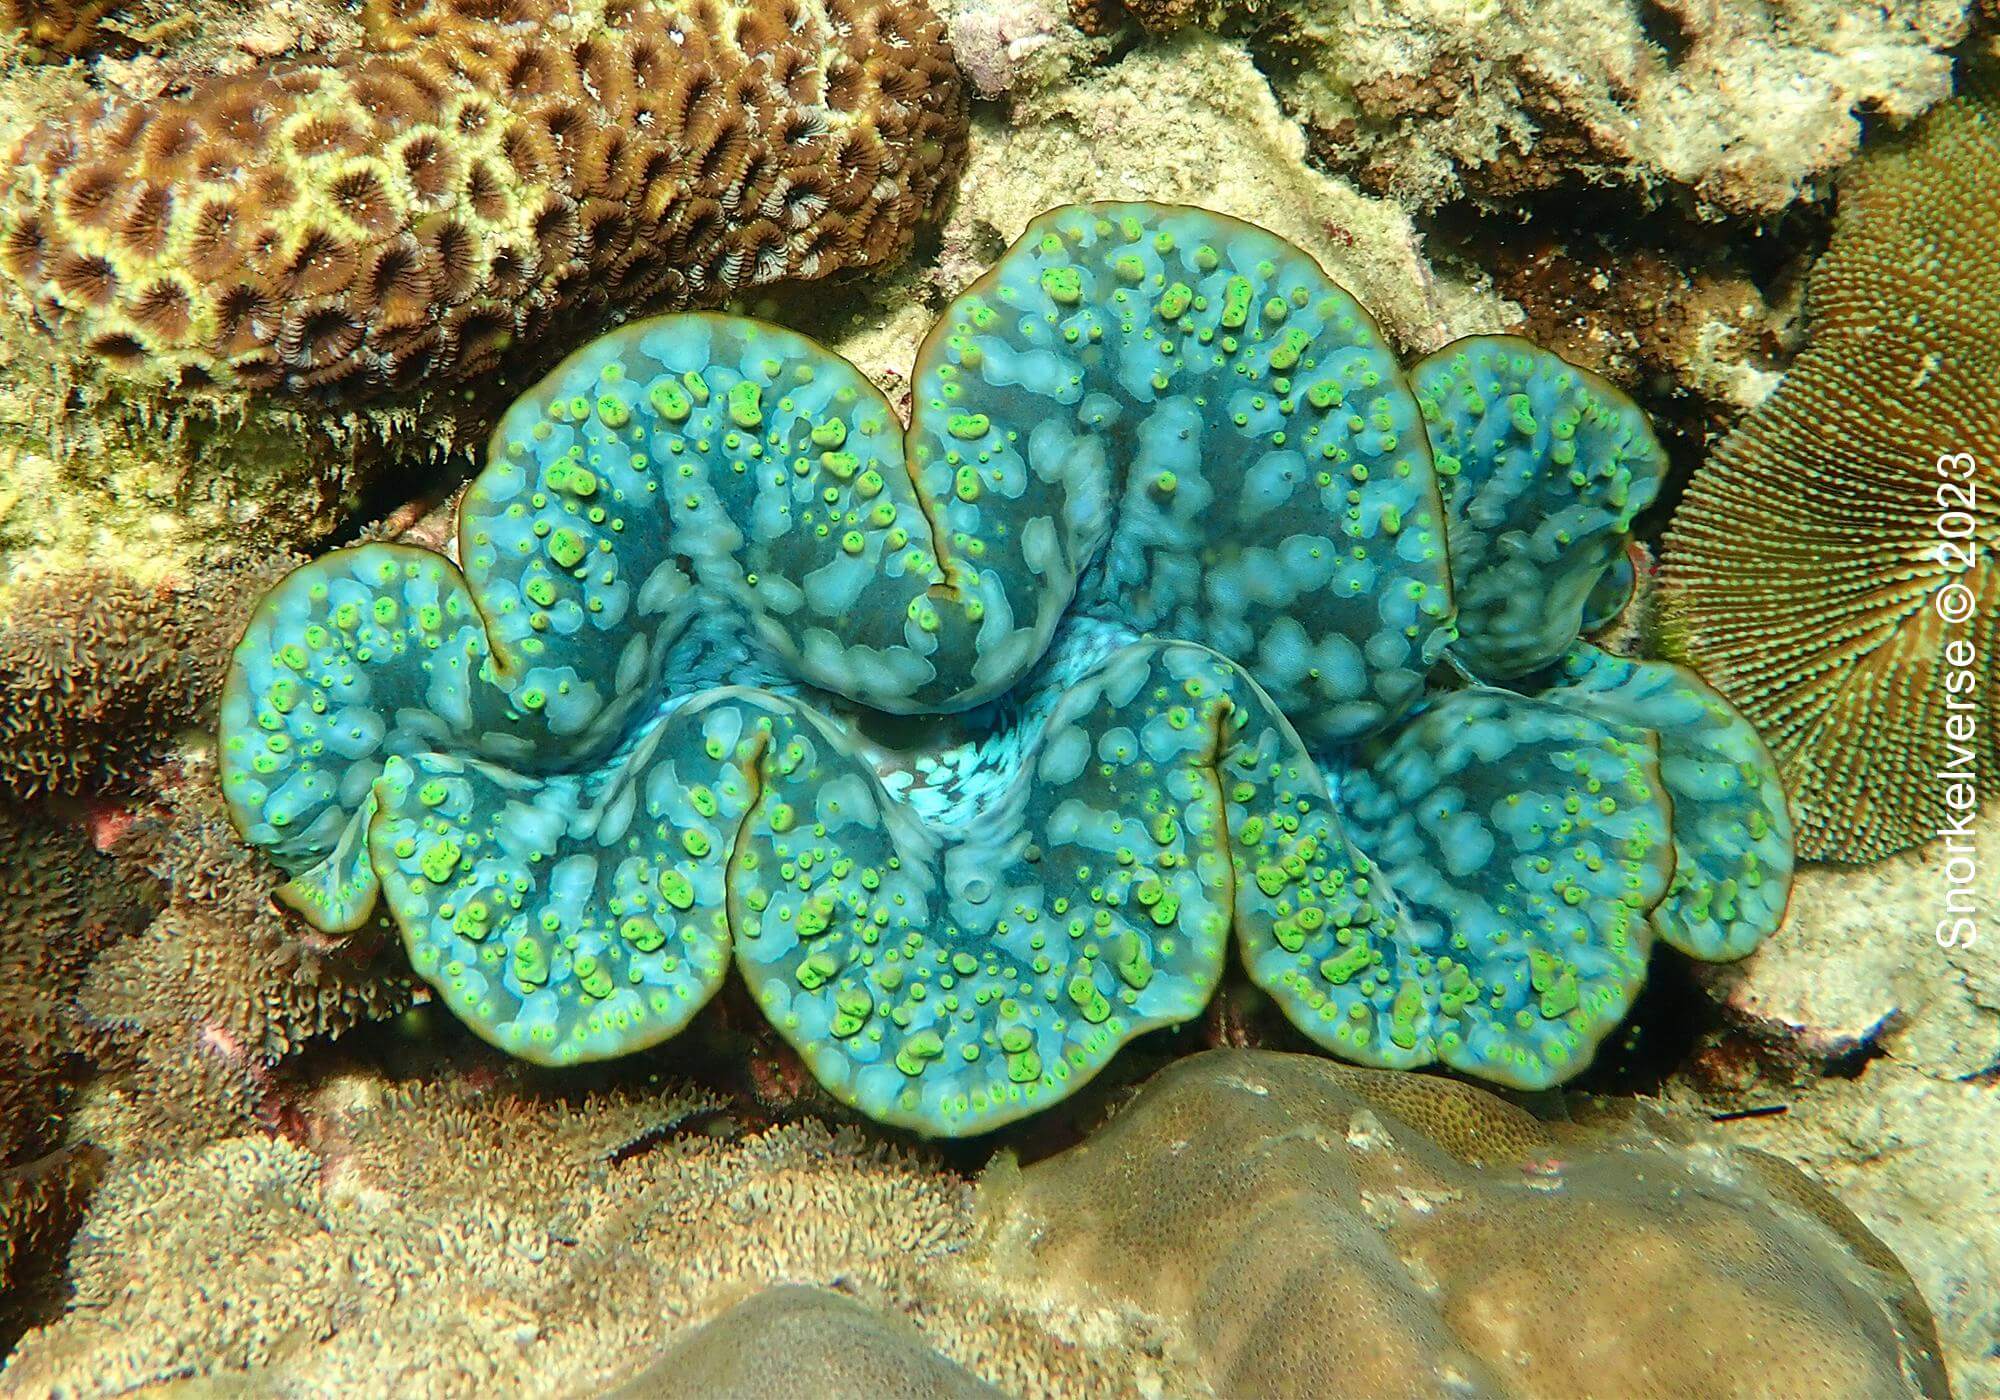 Giant Clam, Koh Pung